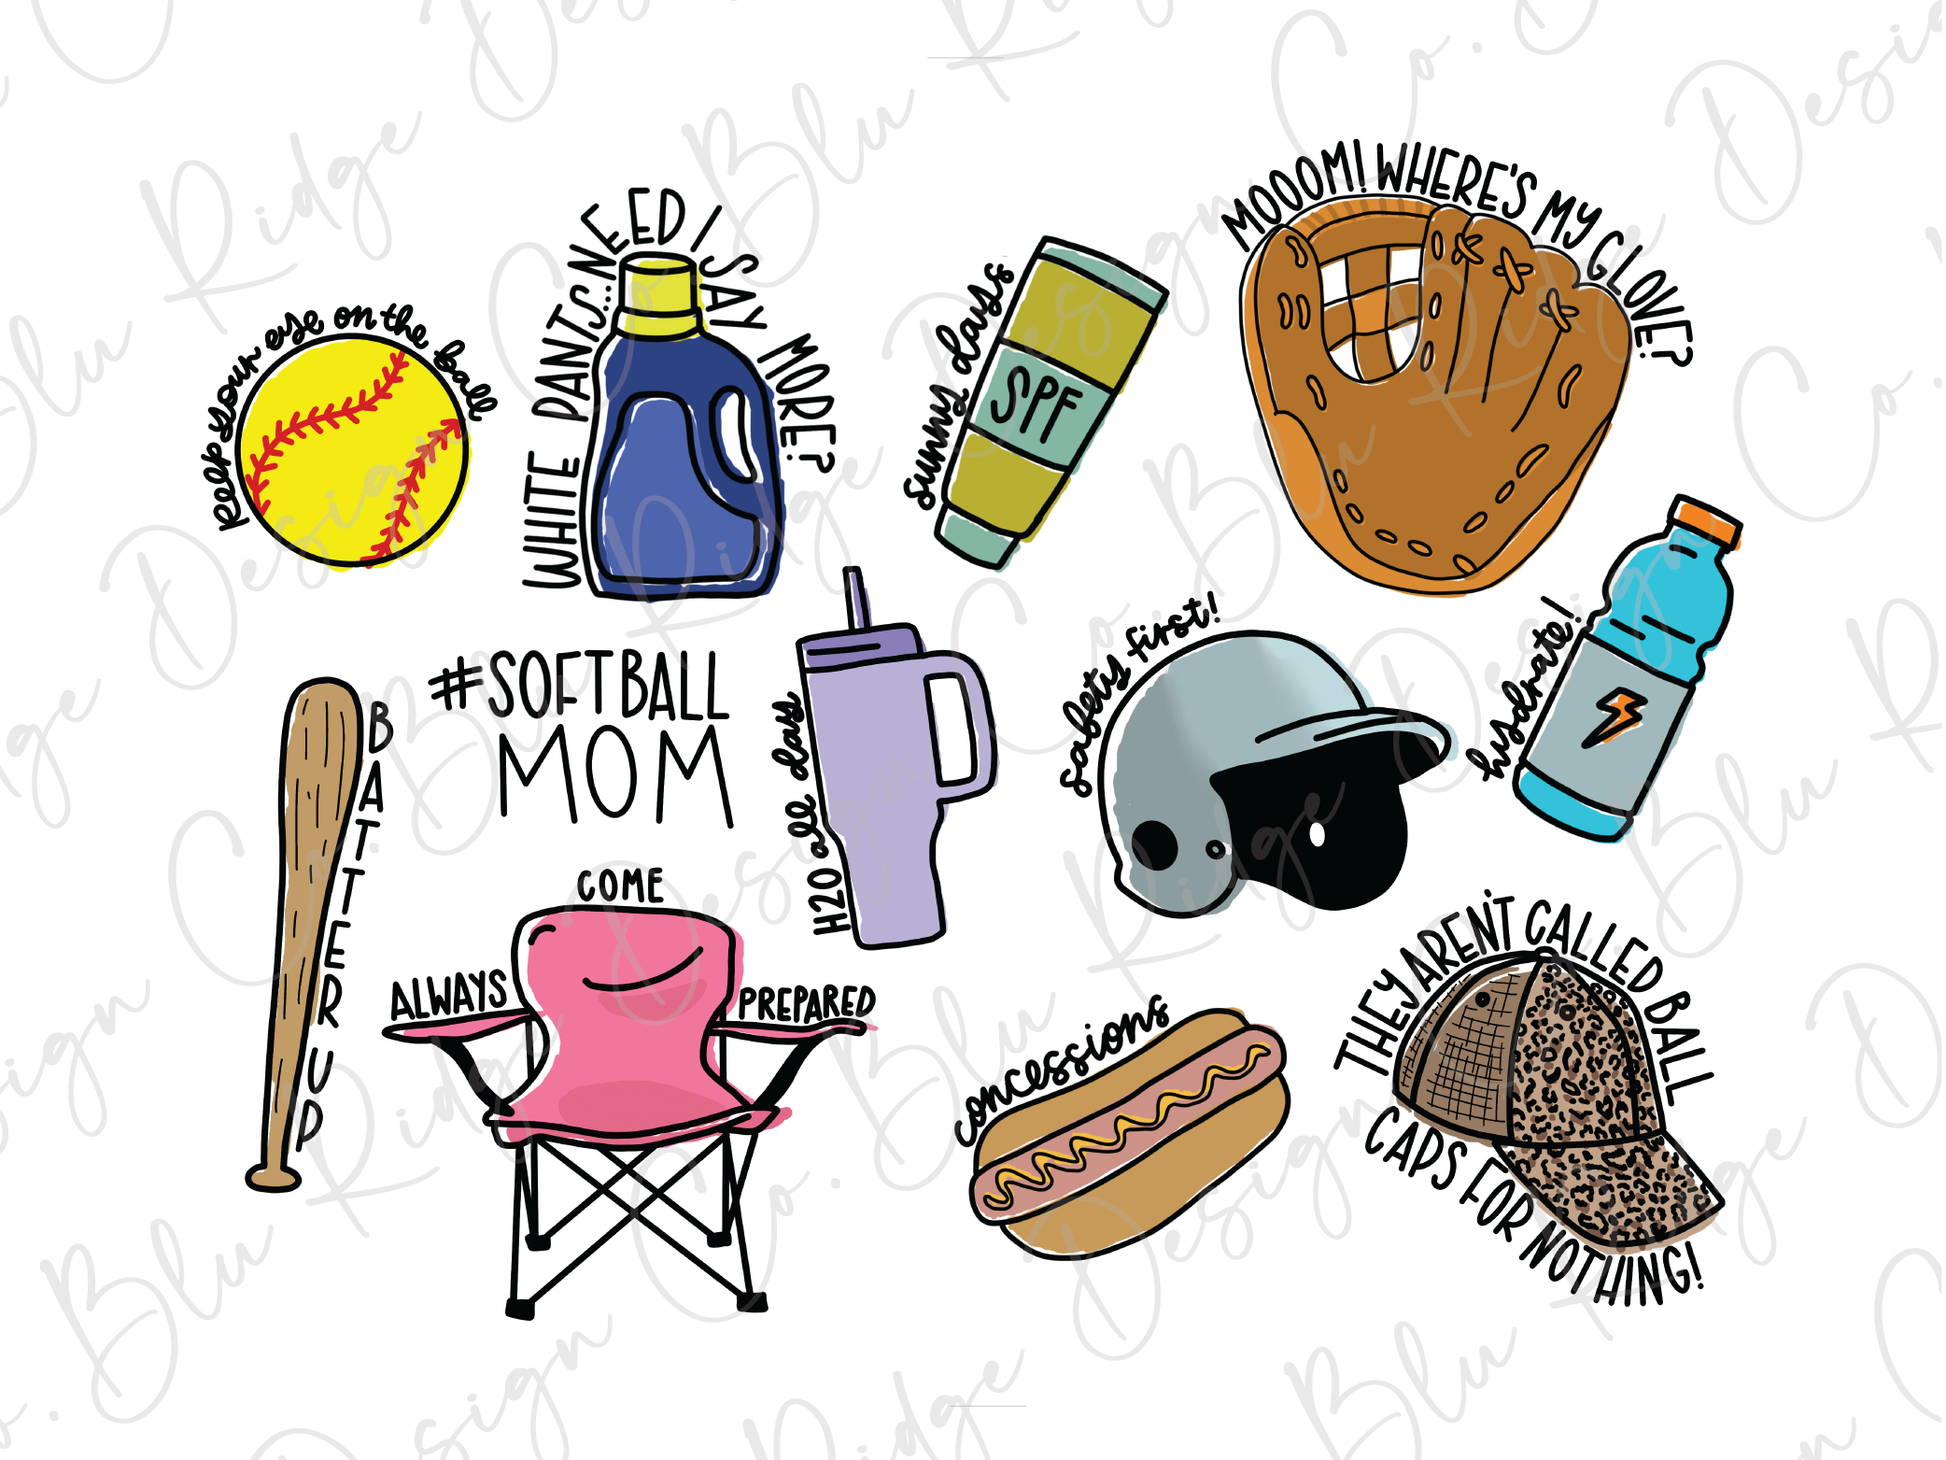 a collection of sports related items including a baseball glove, a glove, a baseball